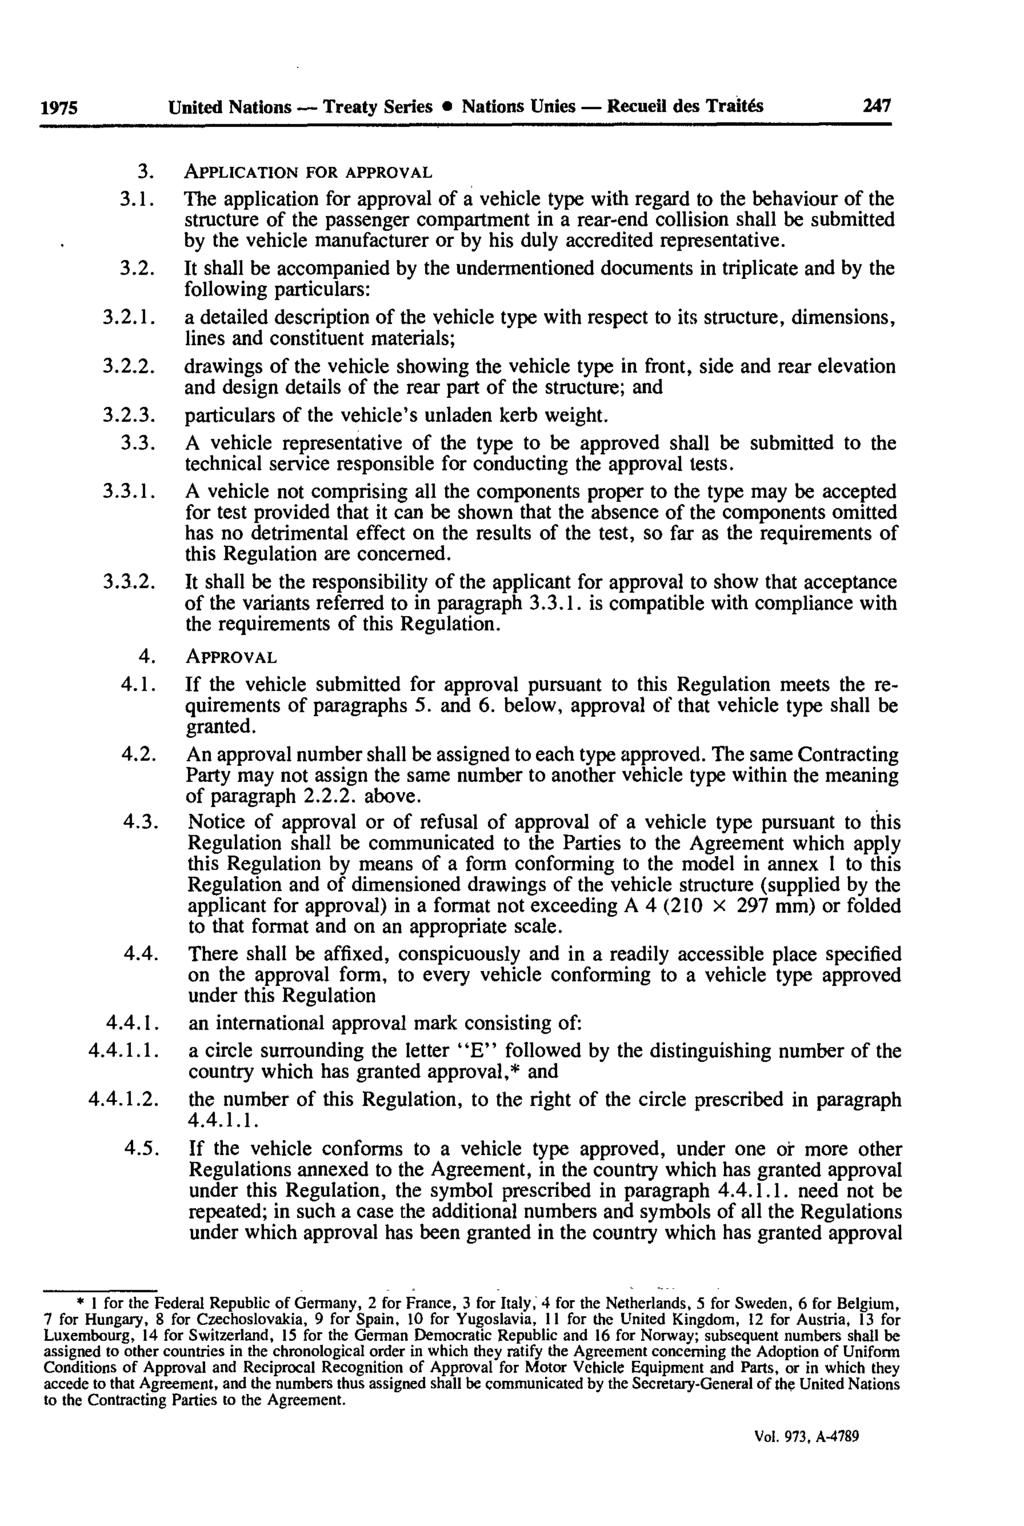 1975 United Nations Treaty Series Nations Unies Recueil des Traités 247 3. APPLICATION FOR APPROVAL 3.1. The application for approval of a vehicle type with regard to the behaviour of the structure